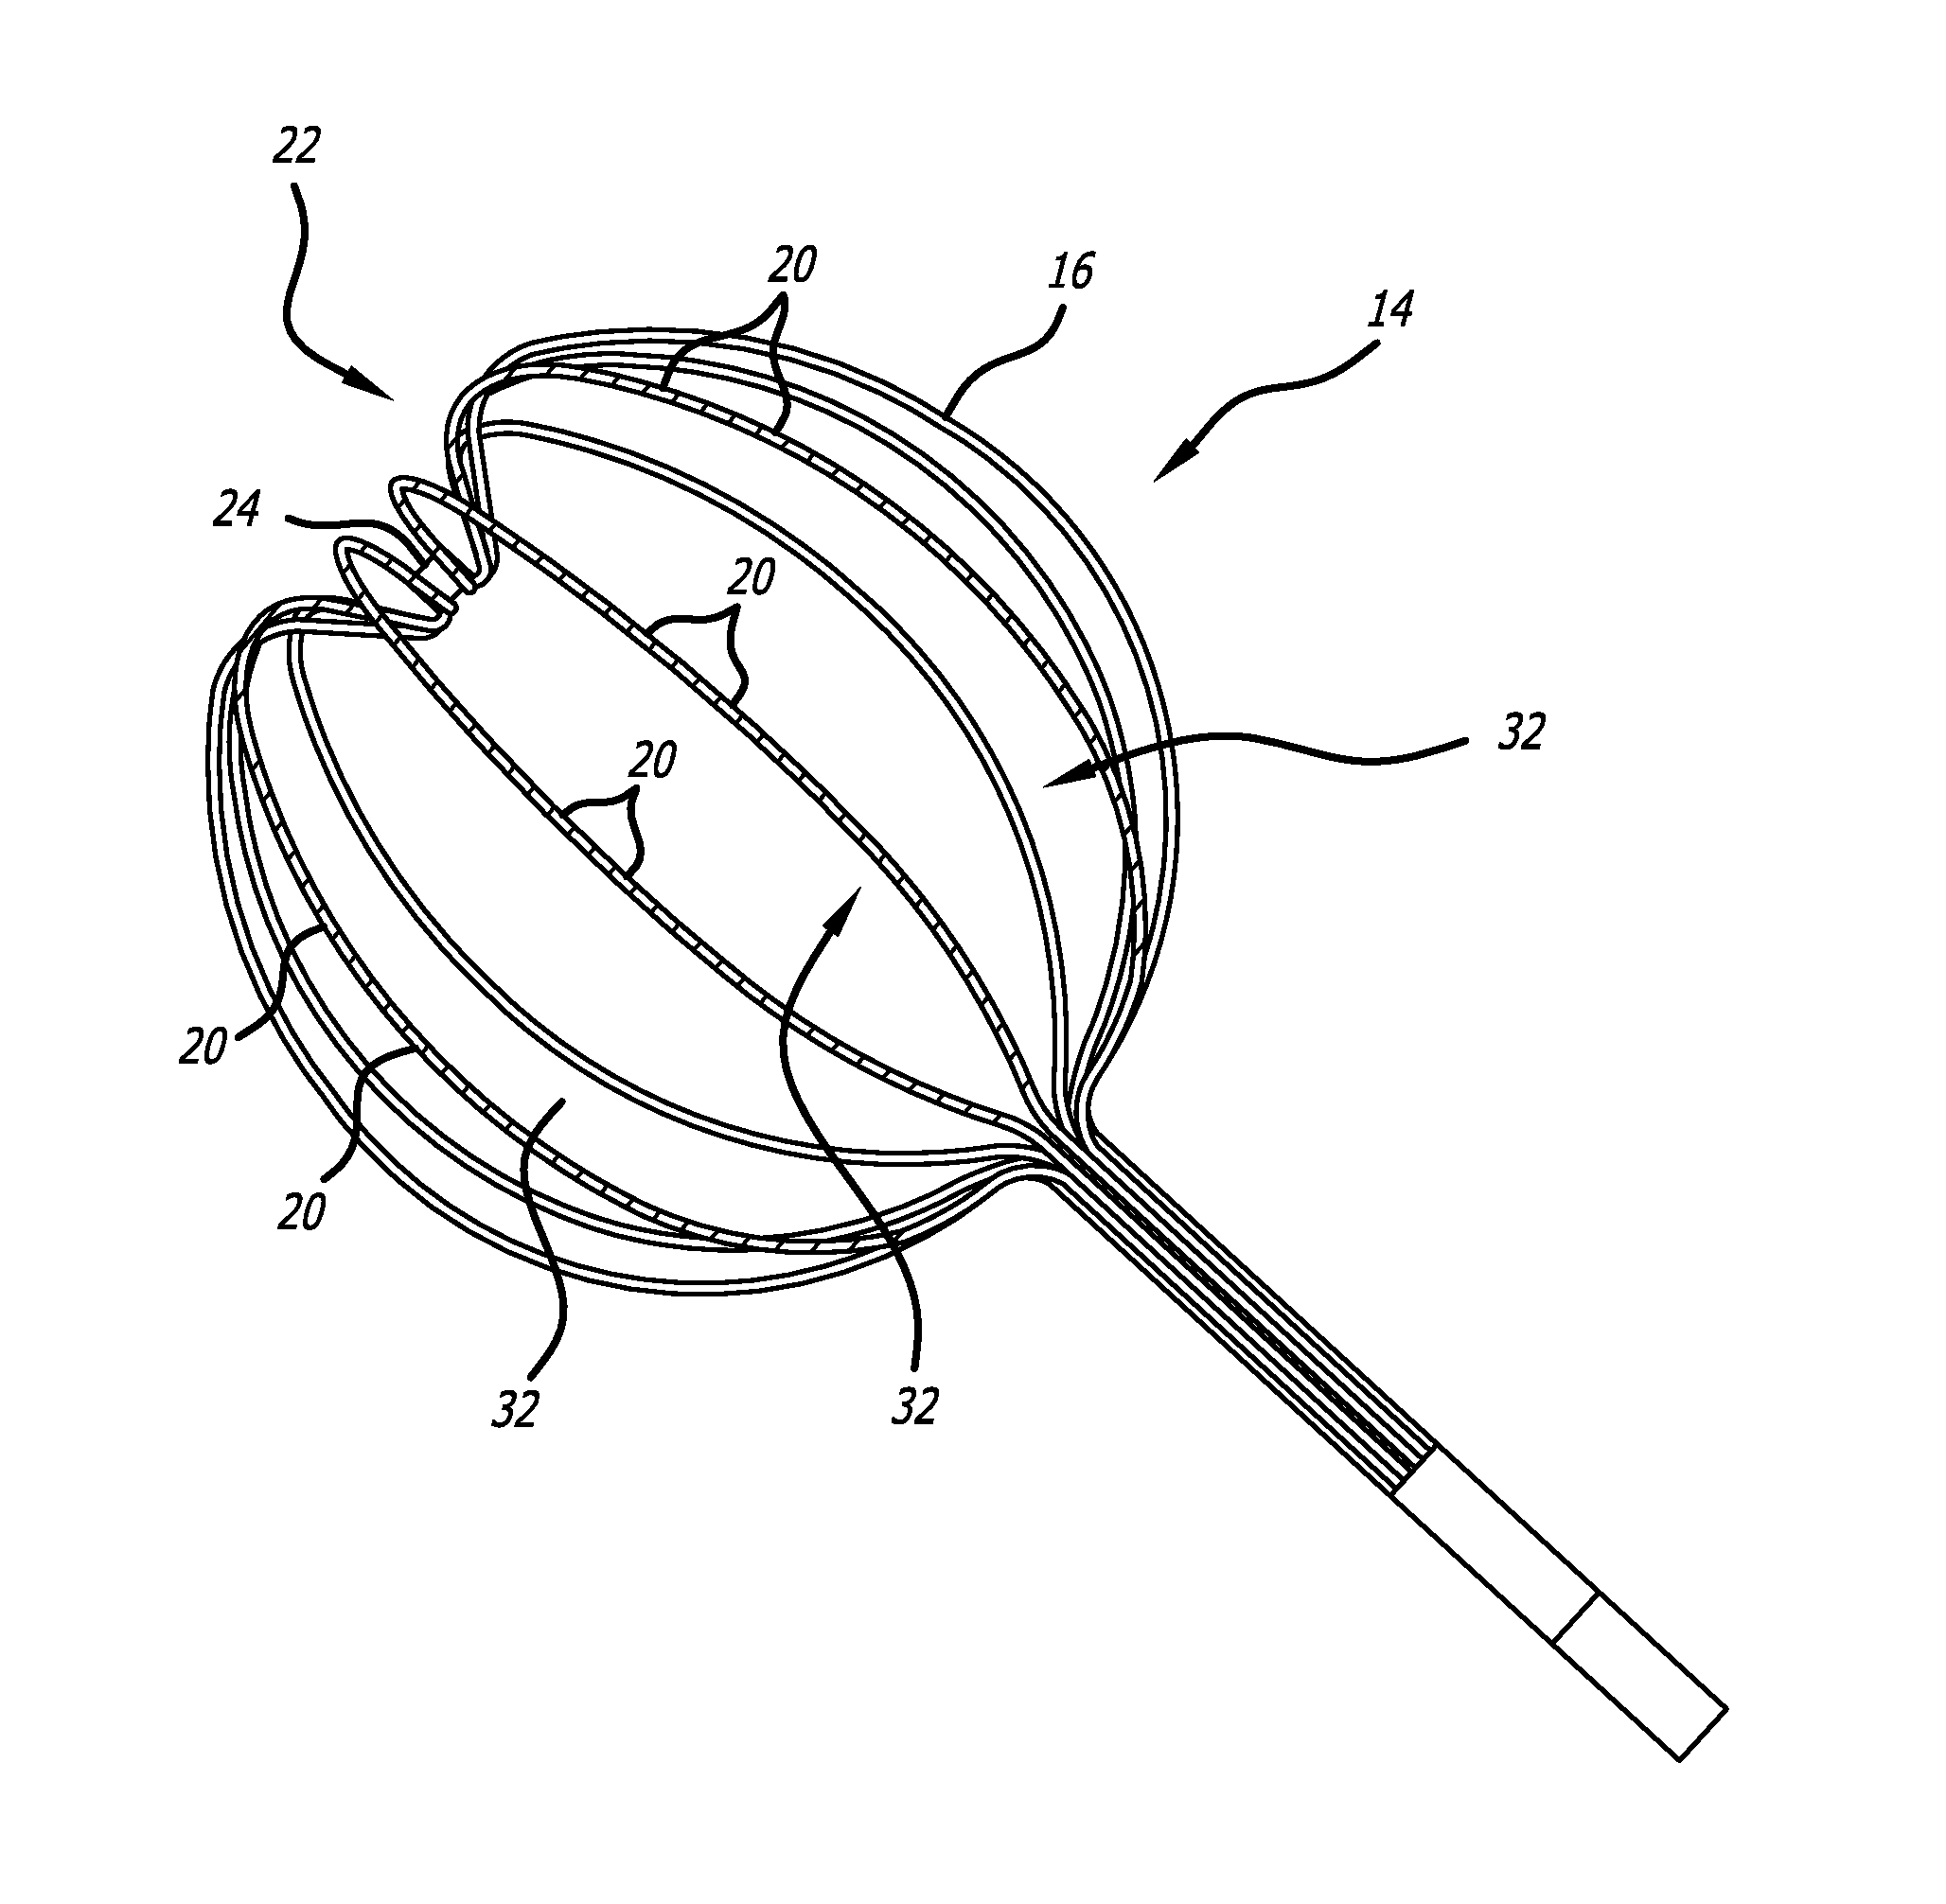 Multi-Electrode Mapping Catheter